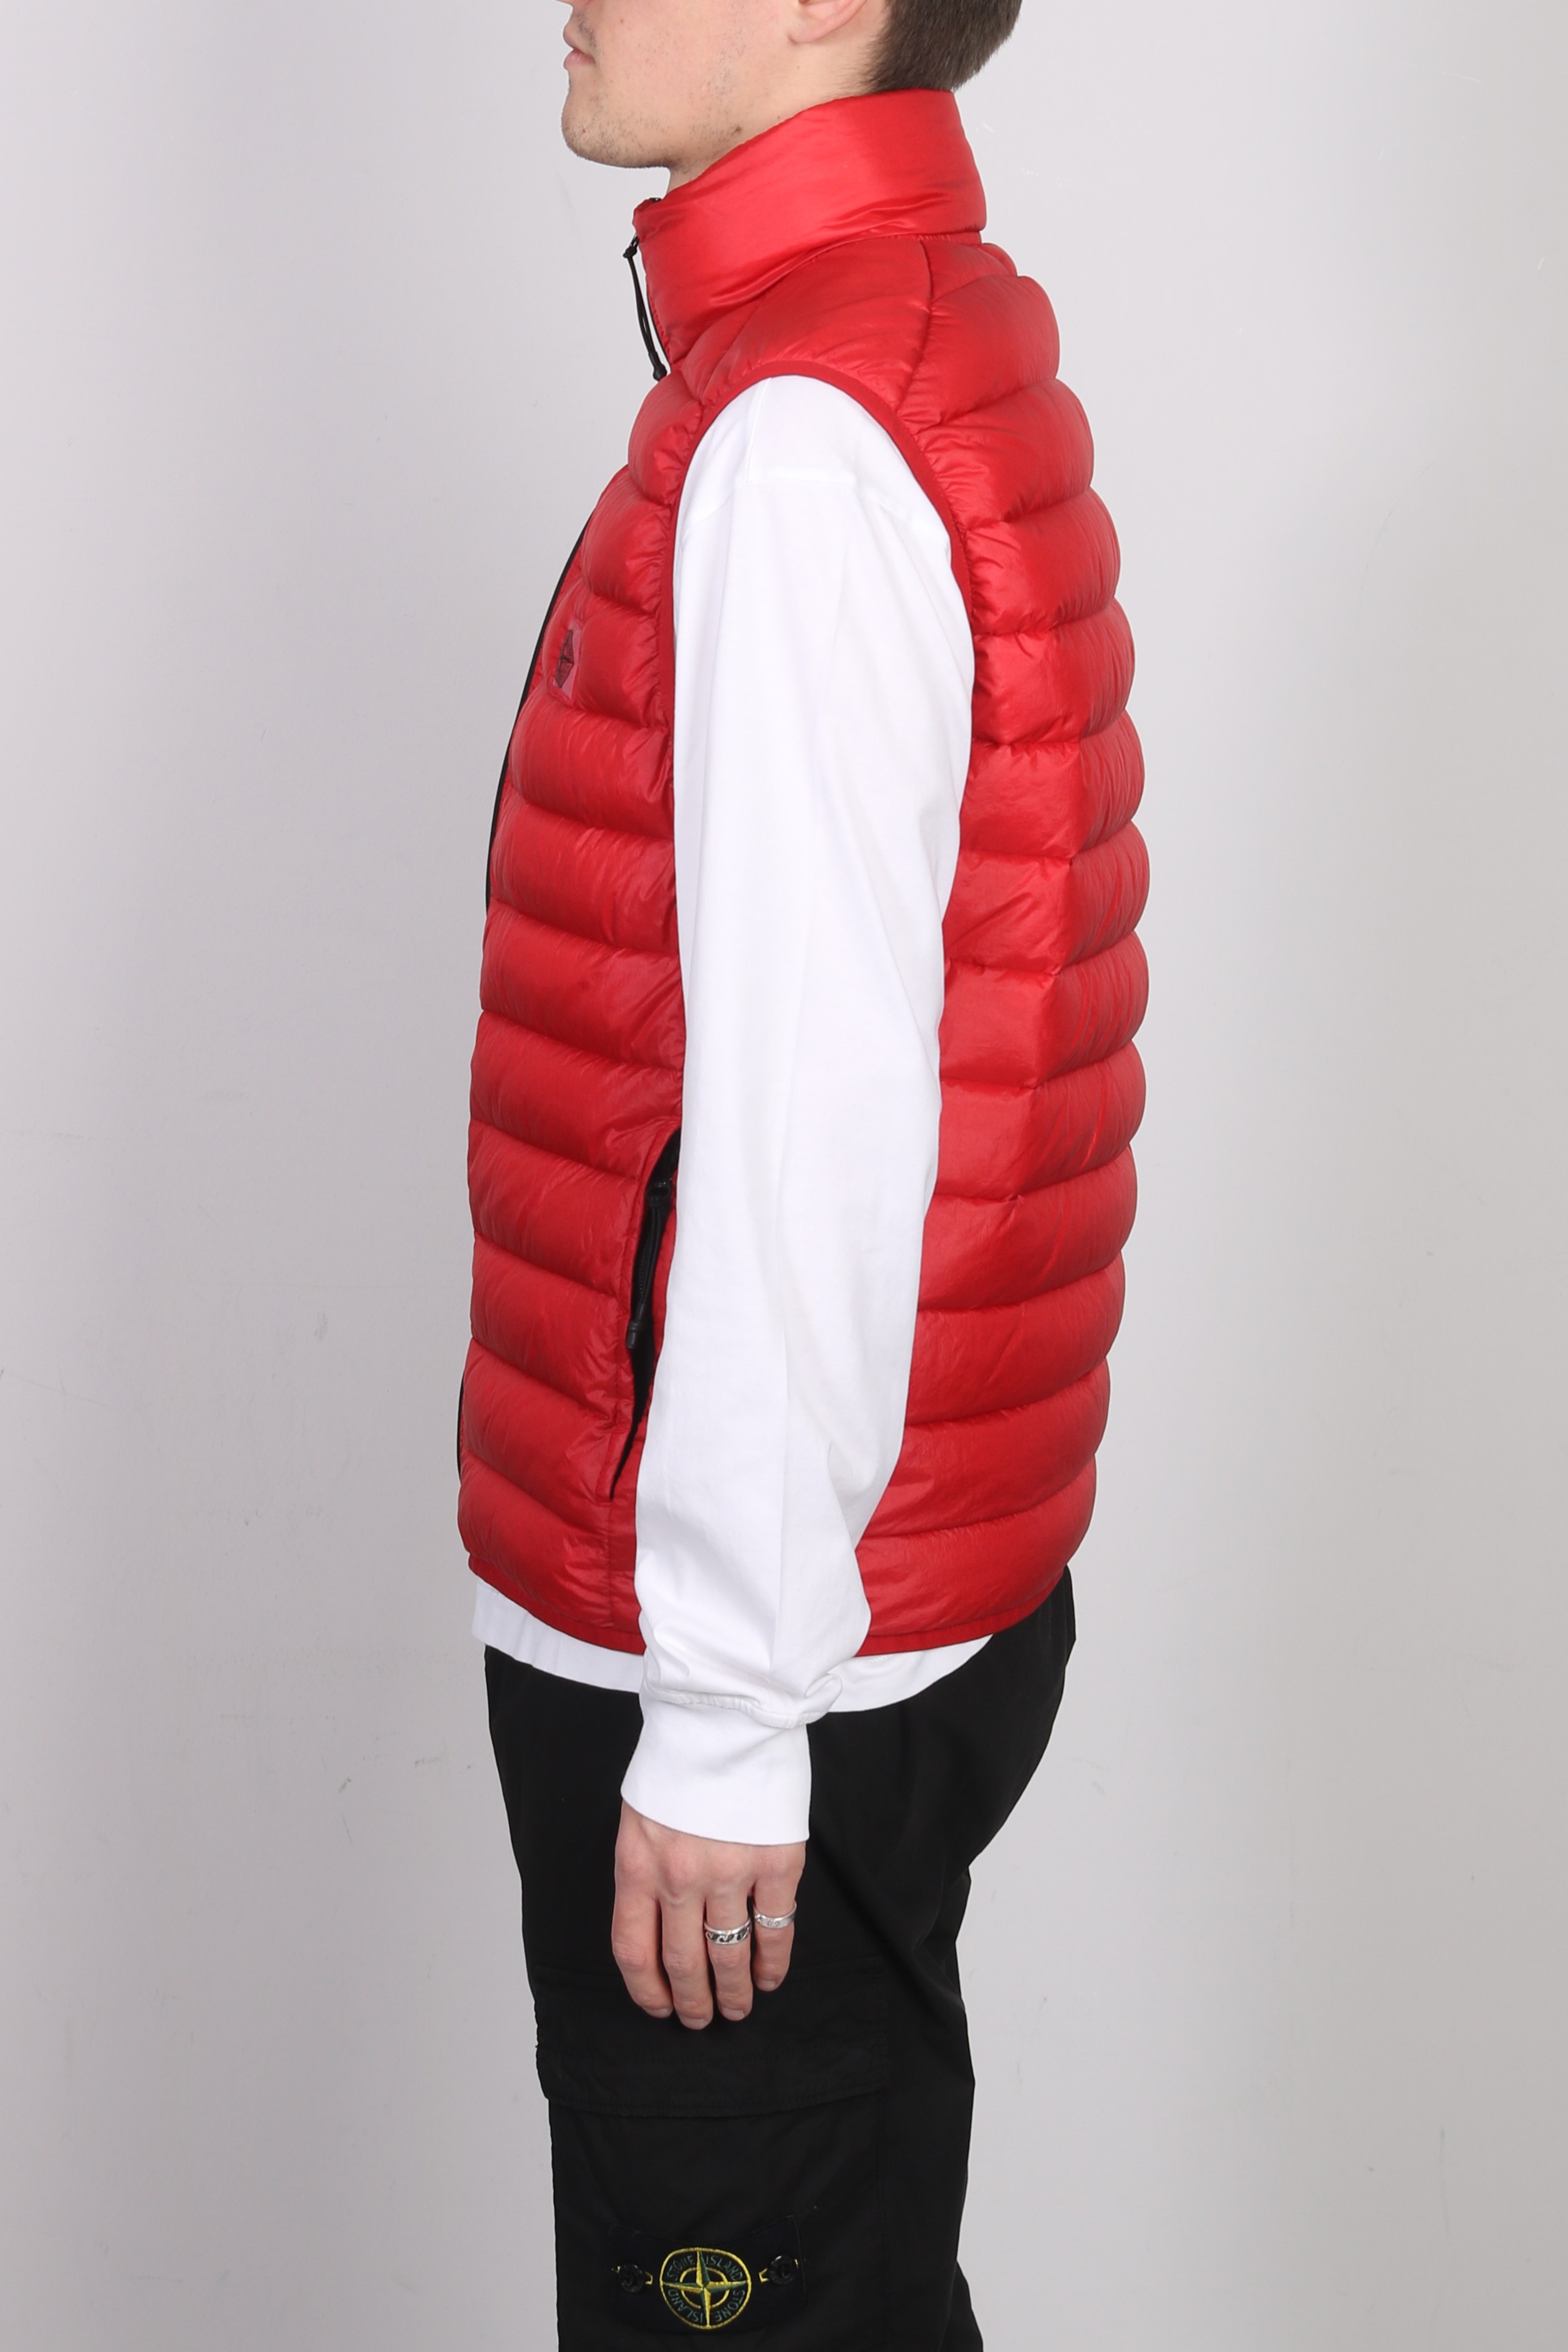 STONE ISLAND Down Vest in Red 2XL